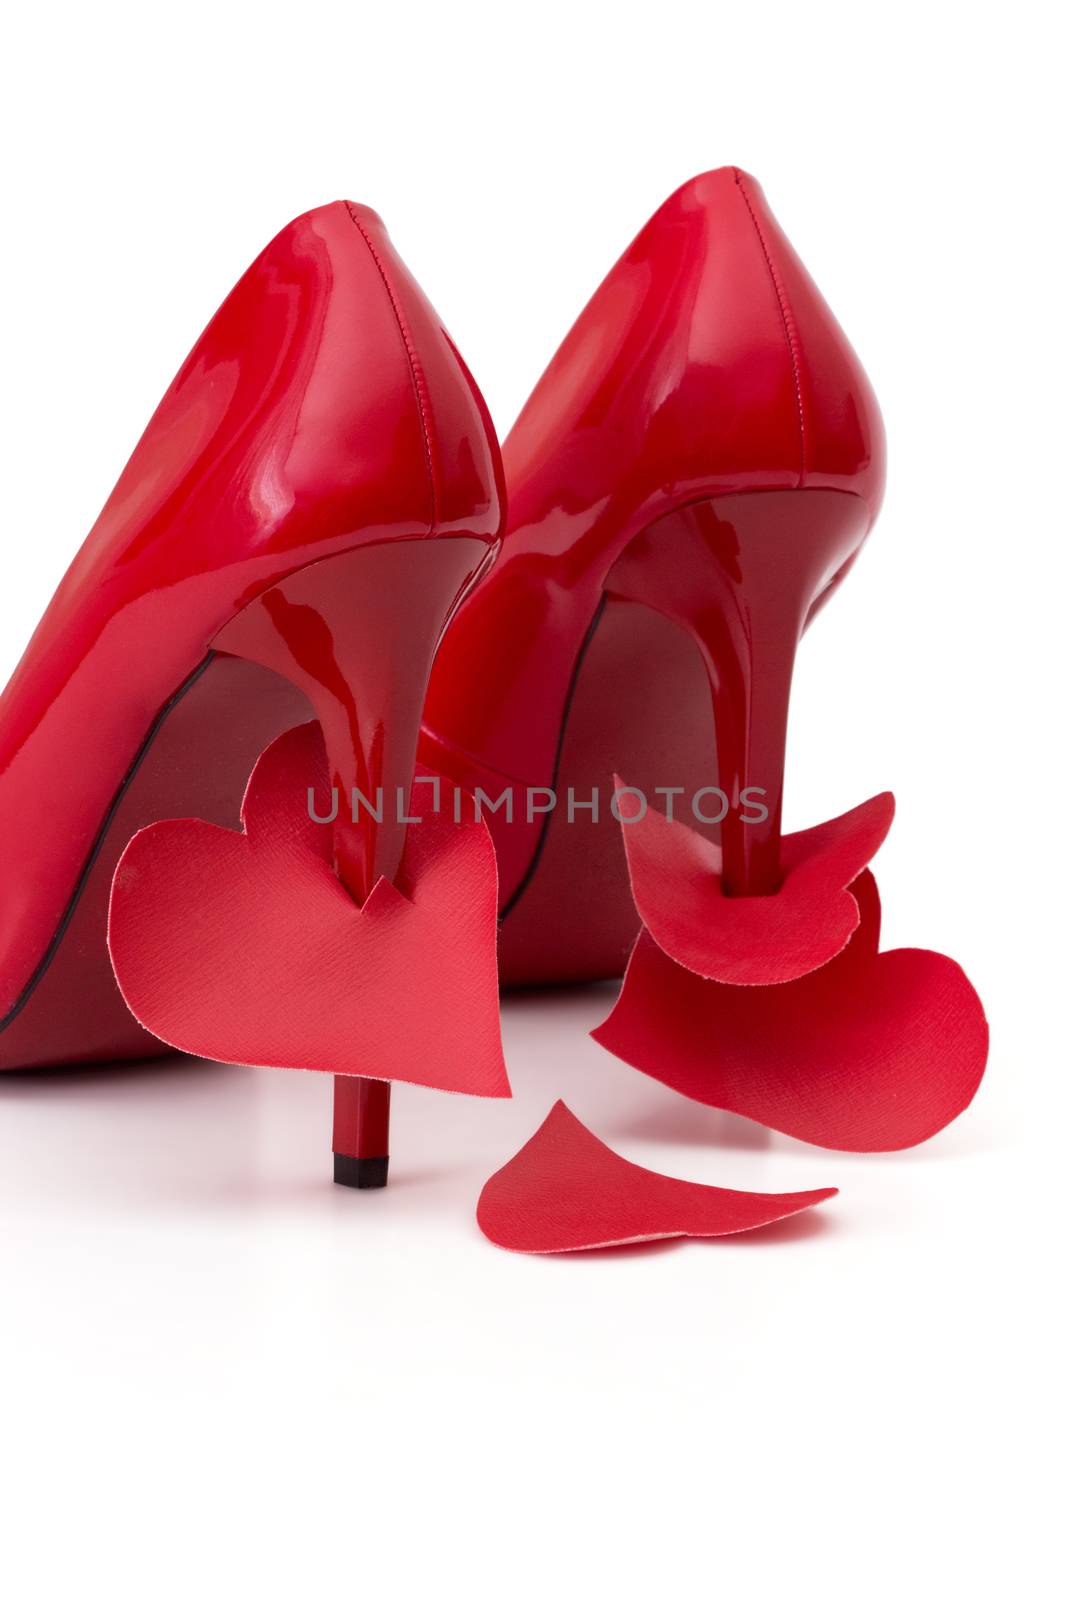 Heart strung on  high heels female shoes on a white background